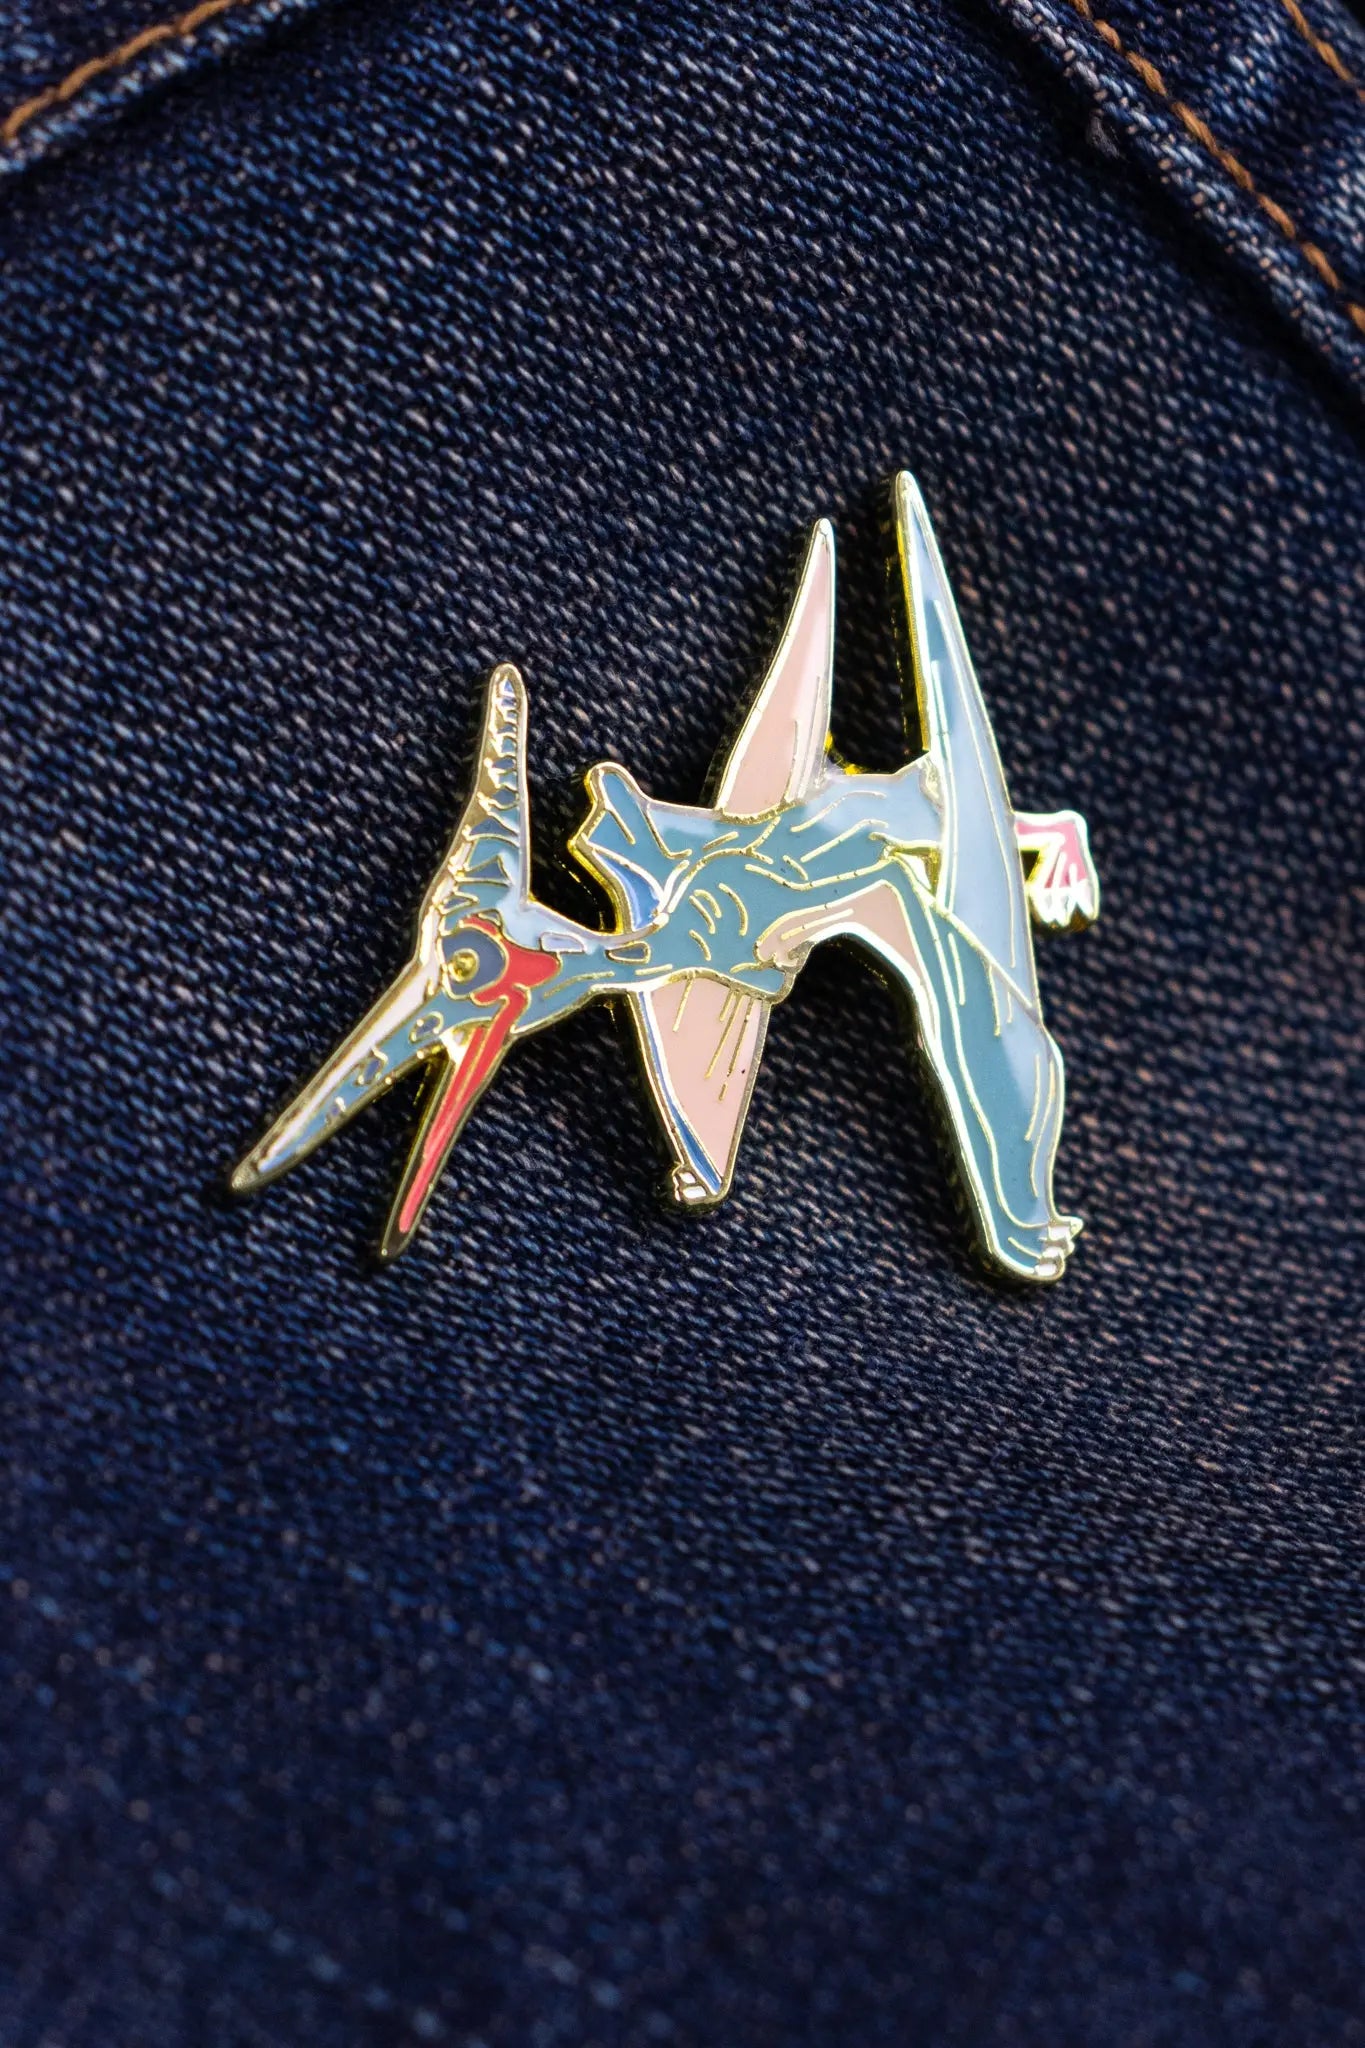 Pteranodon Pin - Stemcell Science Shop